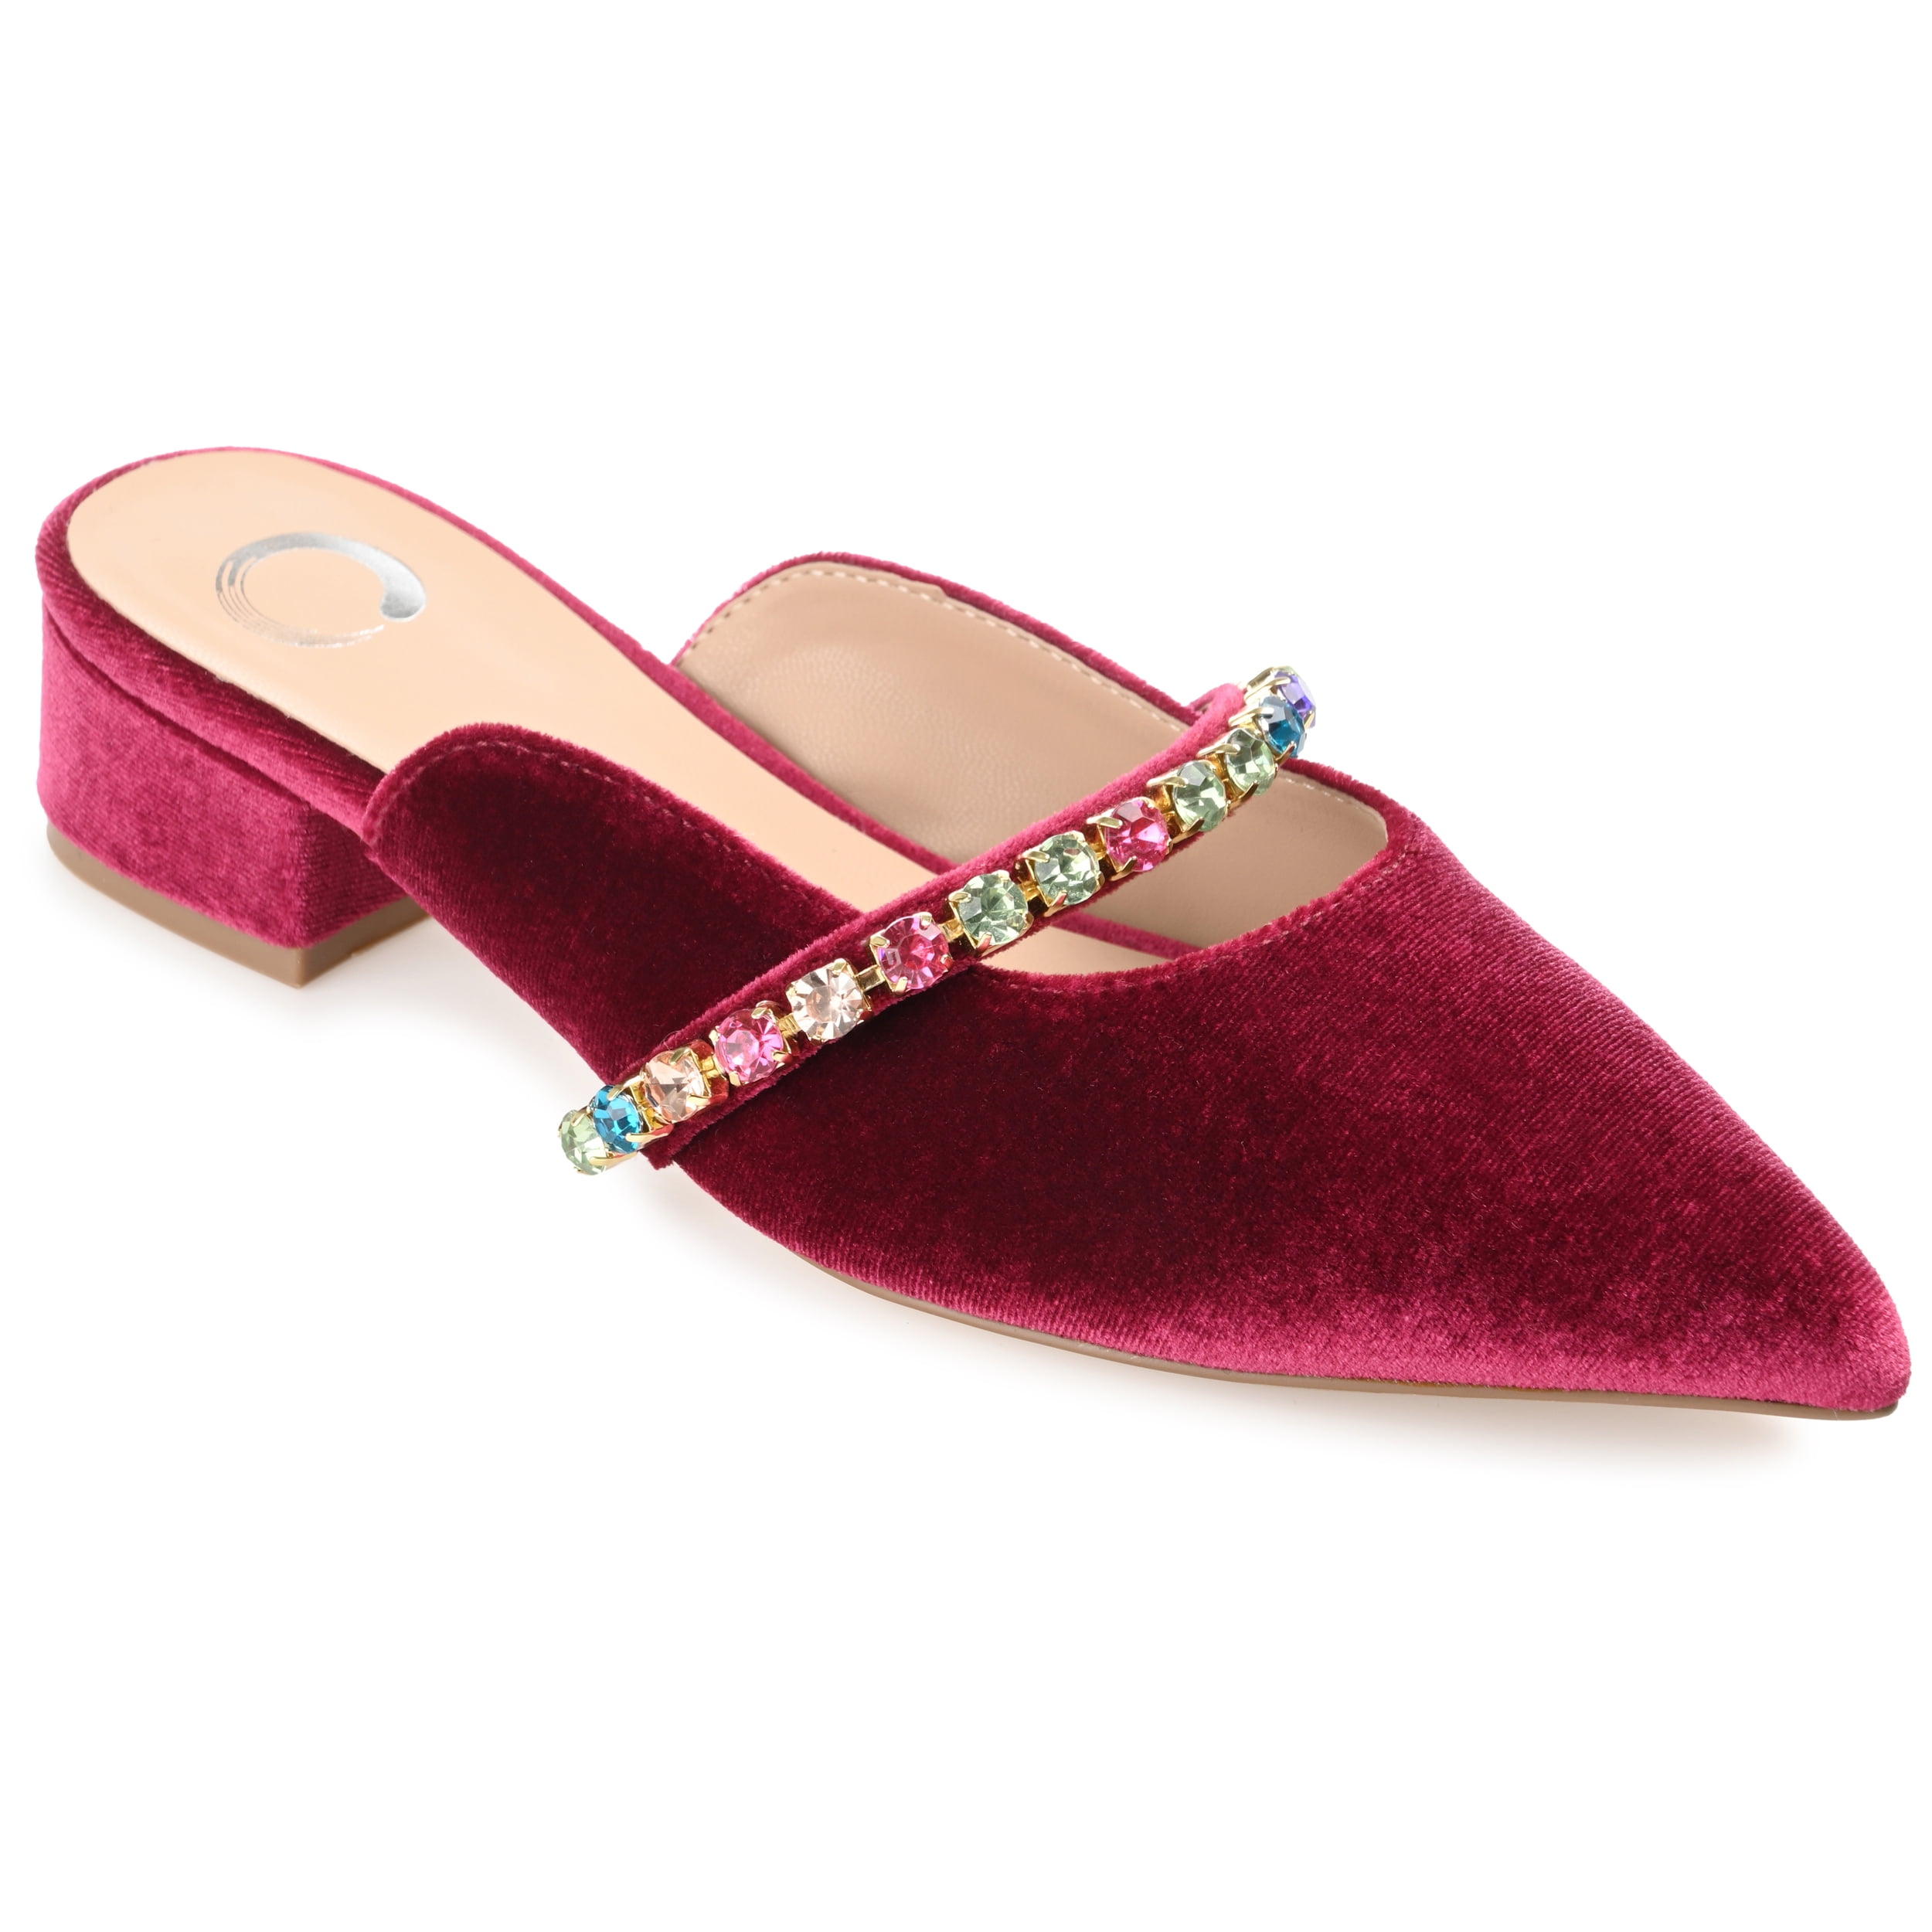 Journee Collection Womens Jewel Mules Pointed Toe Slip On Flats ...